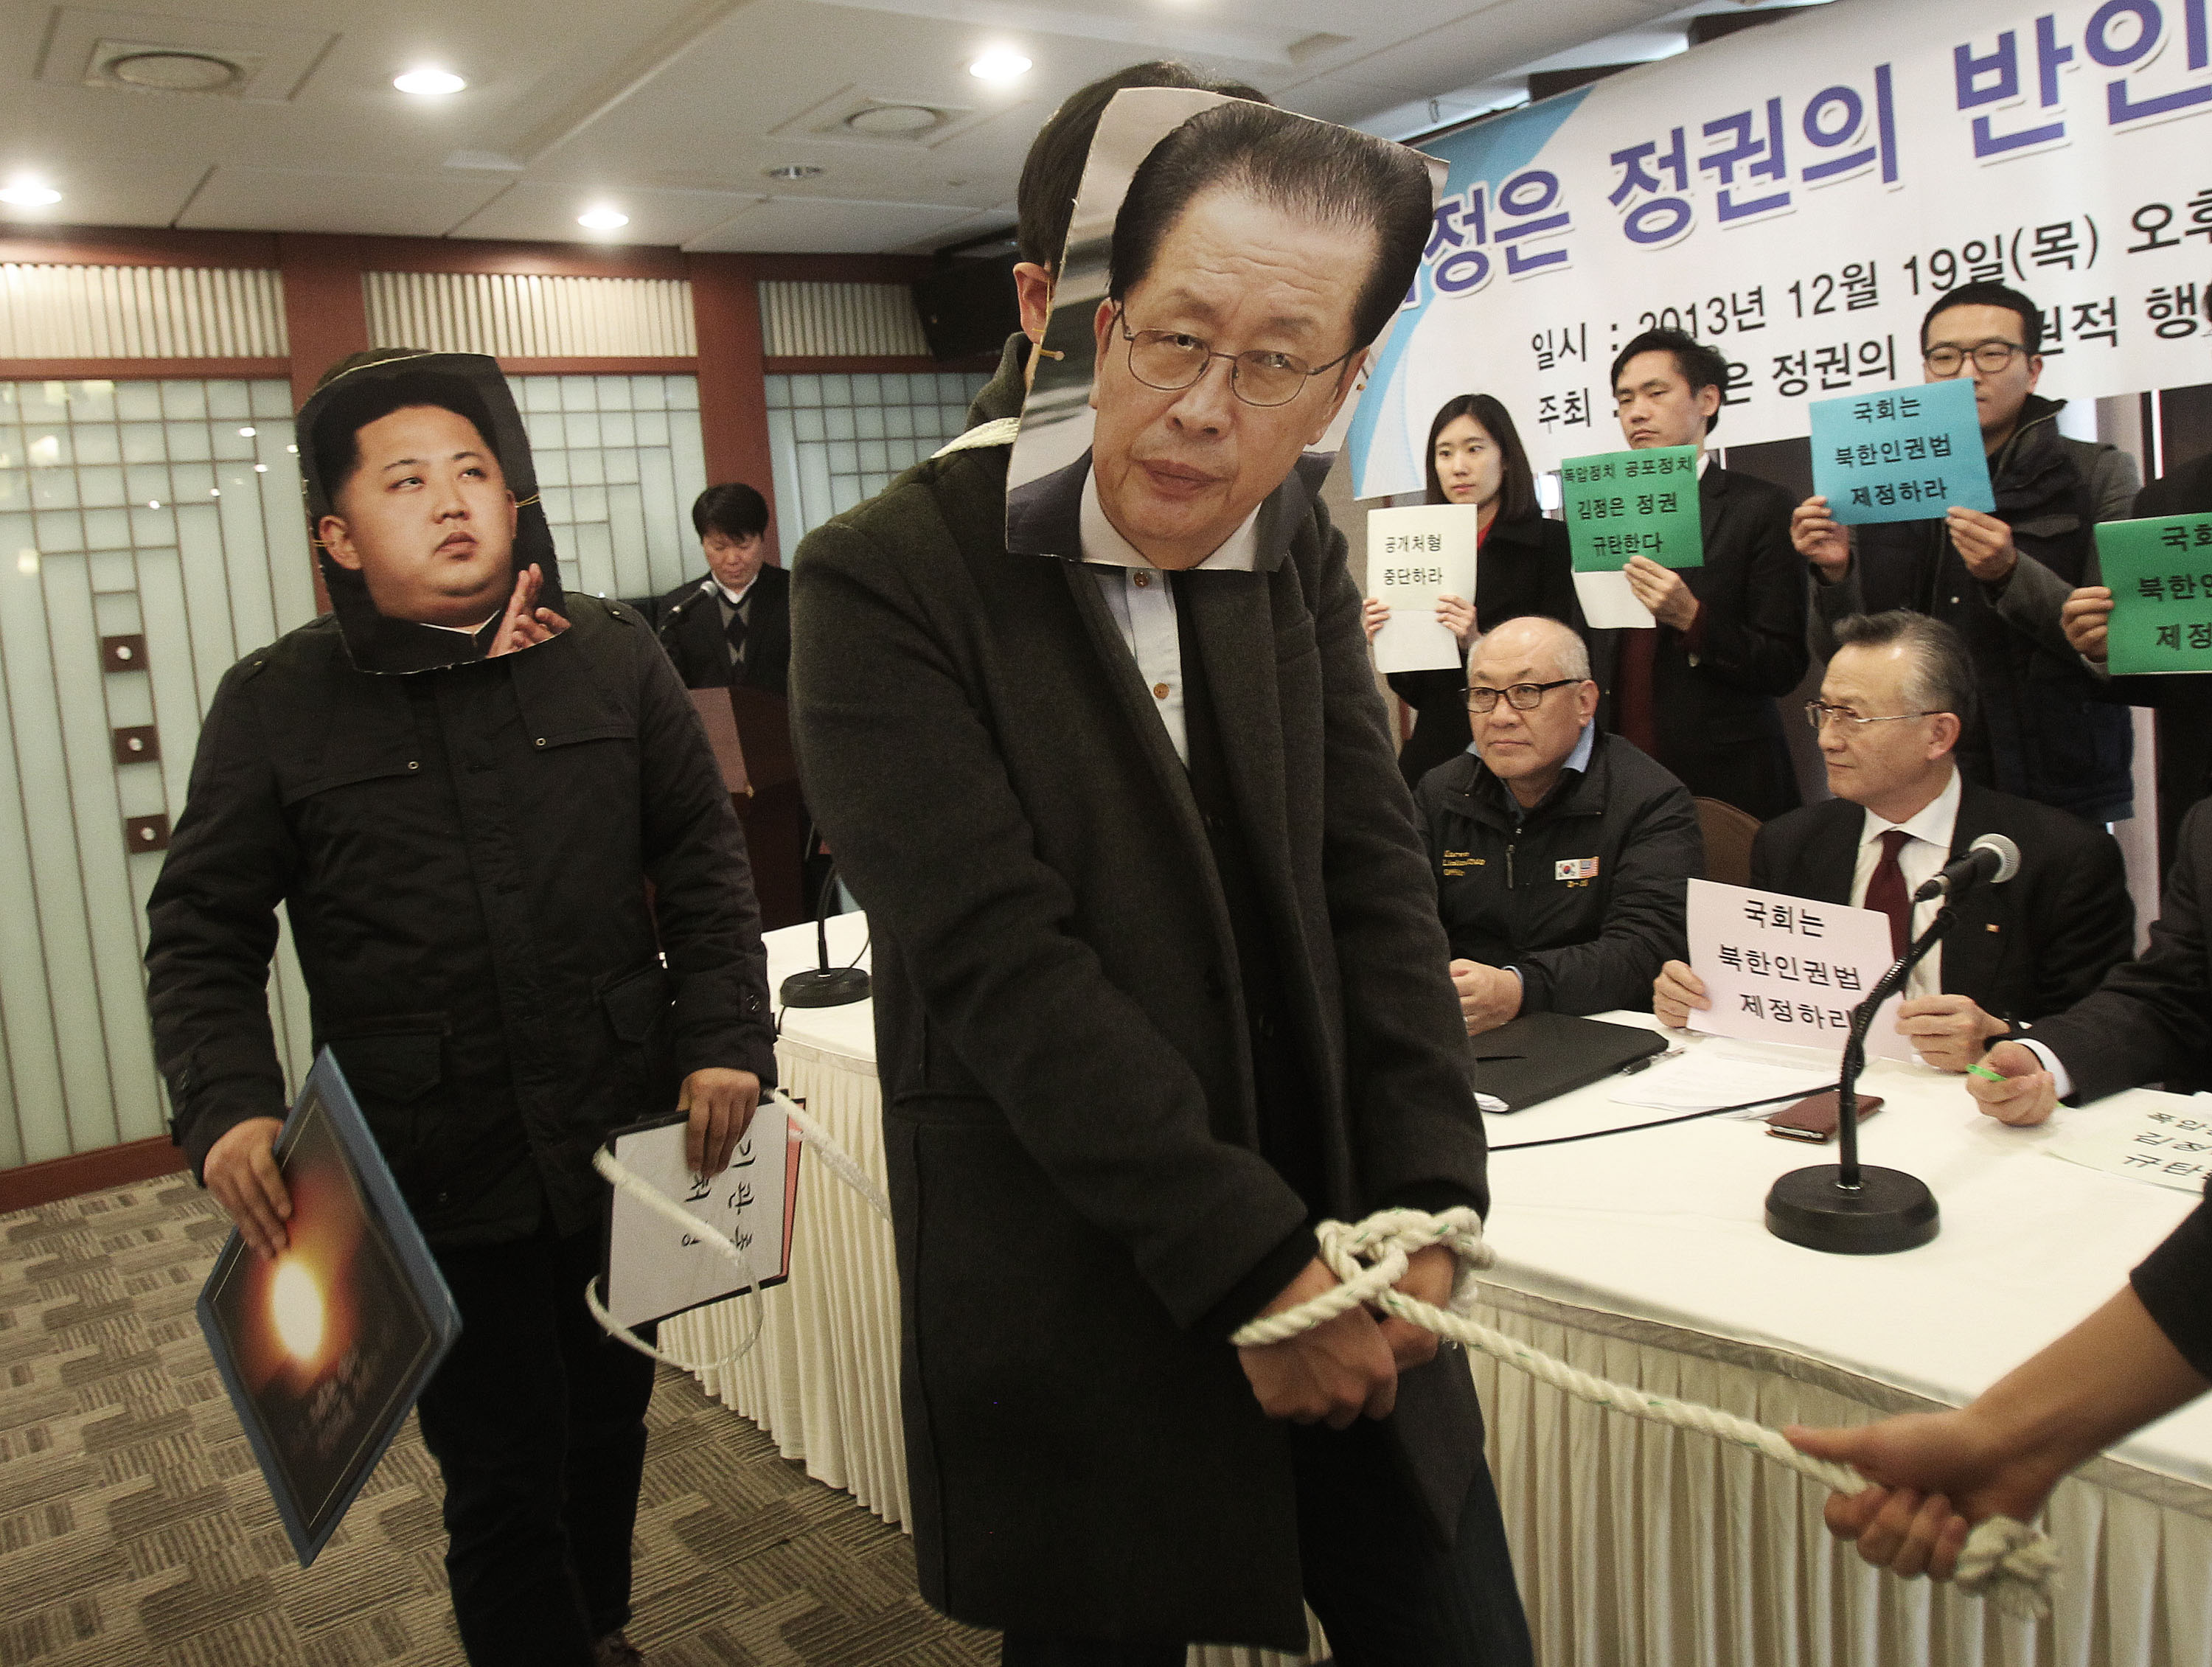 South Korean college students wearing masks of North Korean leader Kim Jong-un (left) and his uncle Jang Song-thaek are pictured during a press conference in Seoul, denouncing Kim's dictatorship and alleged human rights violations. Photo: AP.